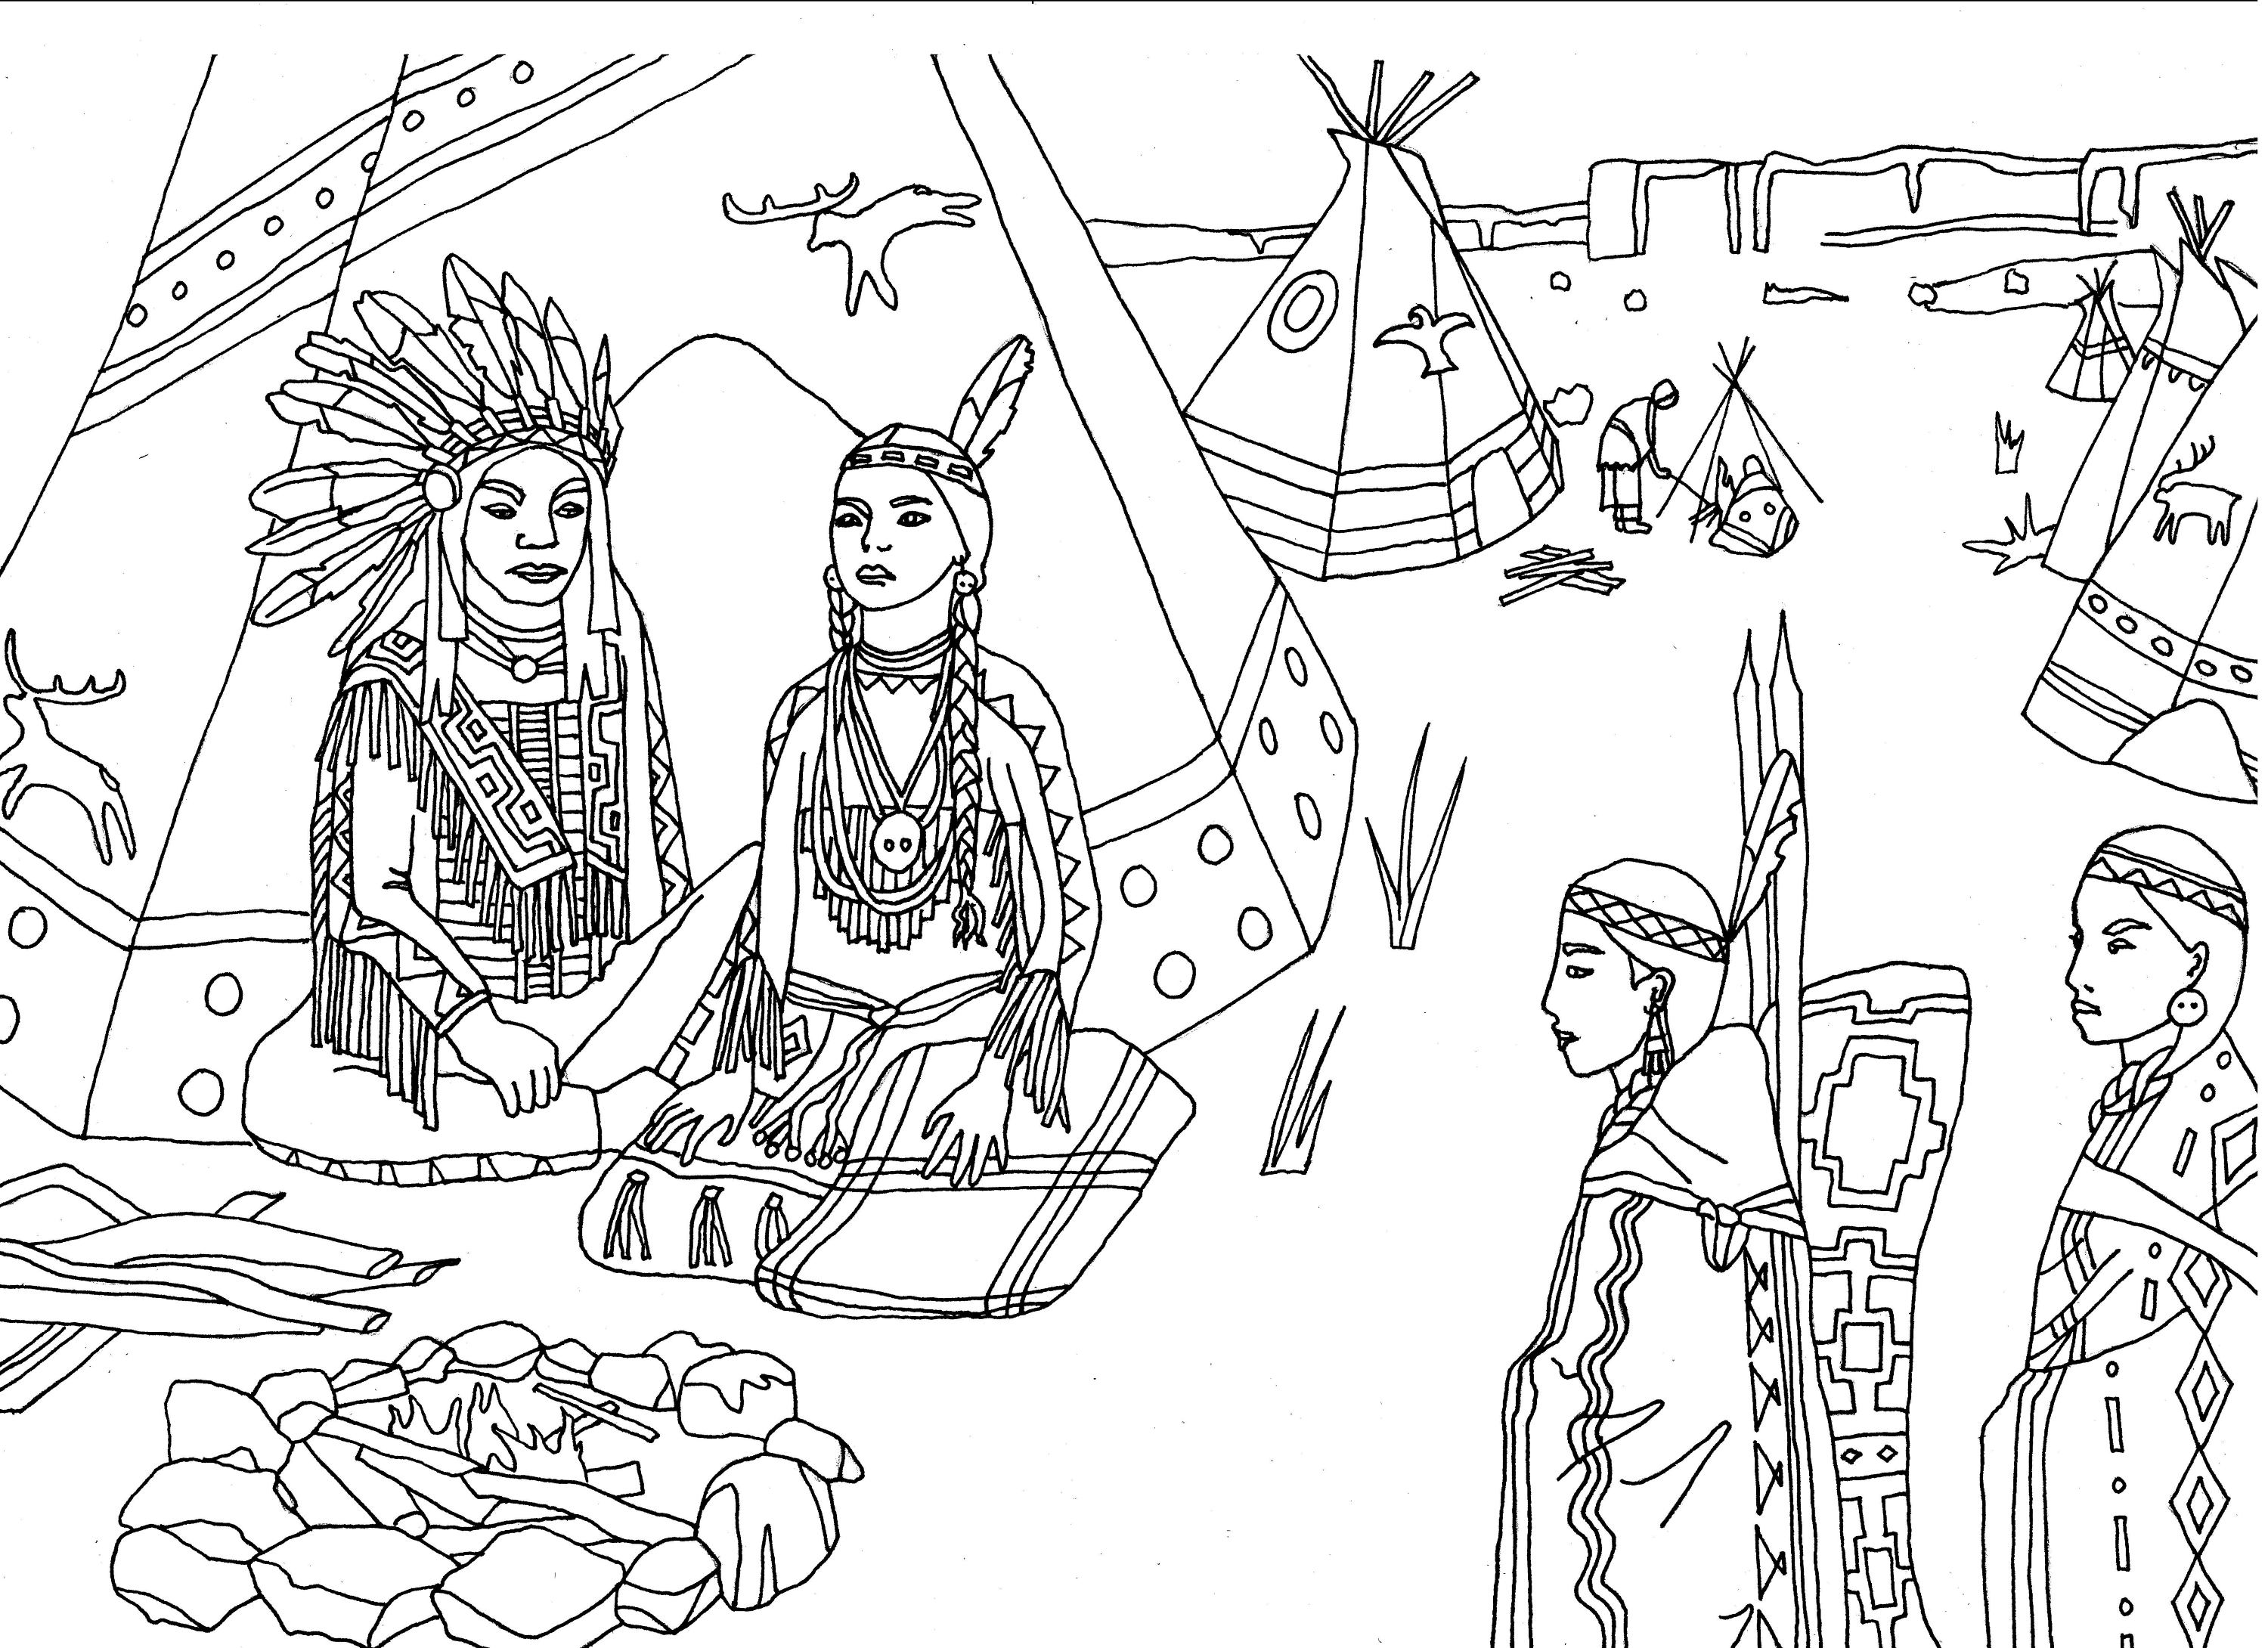 Native americans indians sat in front of a tepee